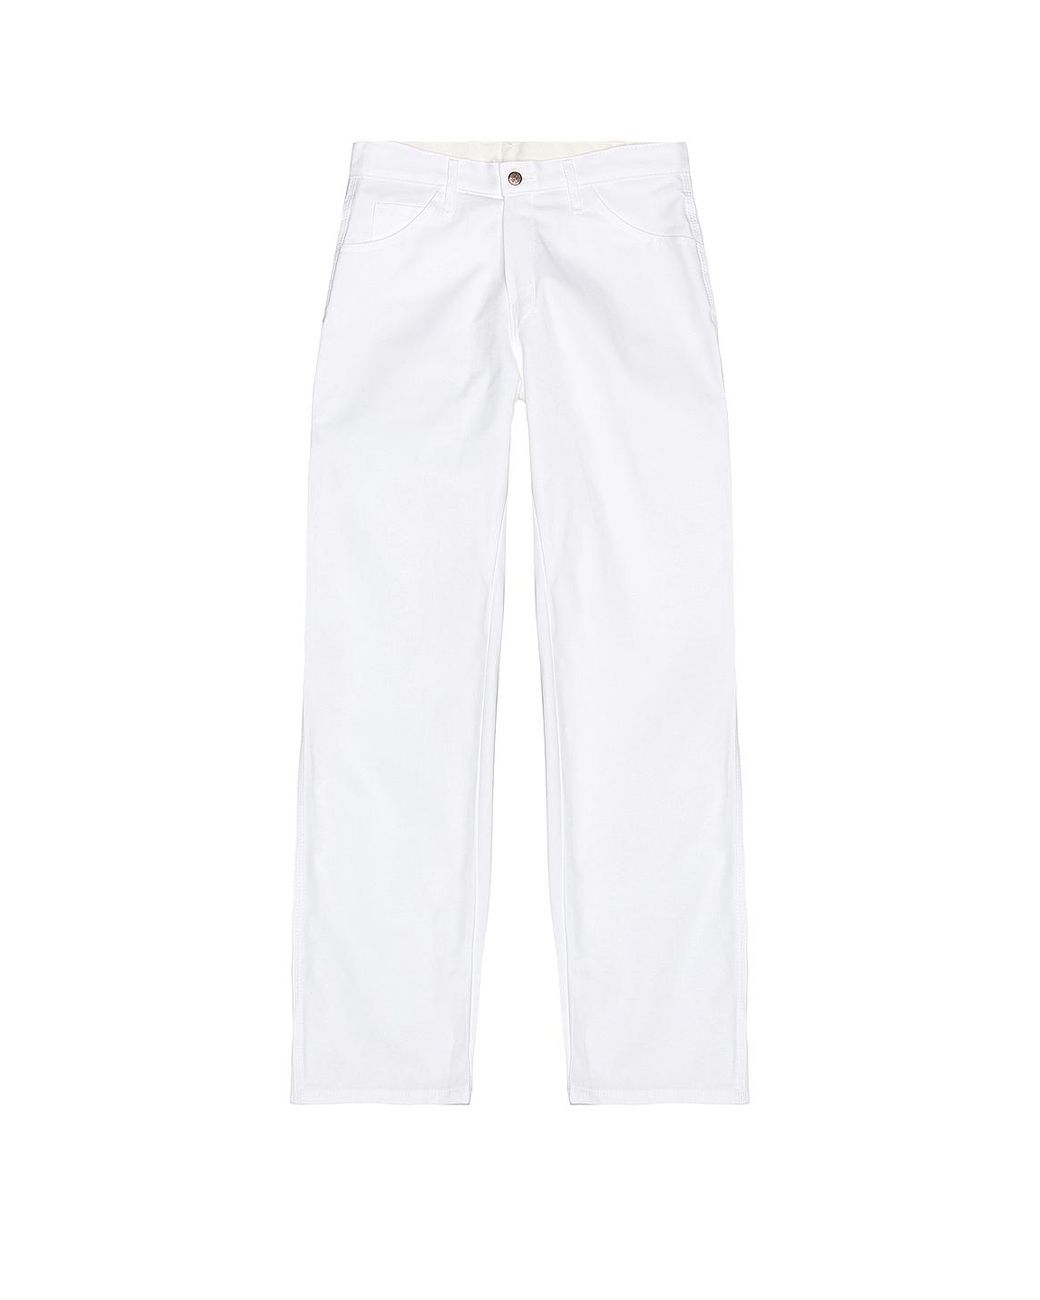 Dickies Cotton Standard Utility Painter Pant in White for Men - Lyst